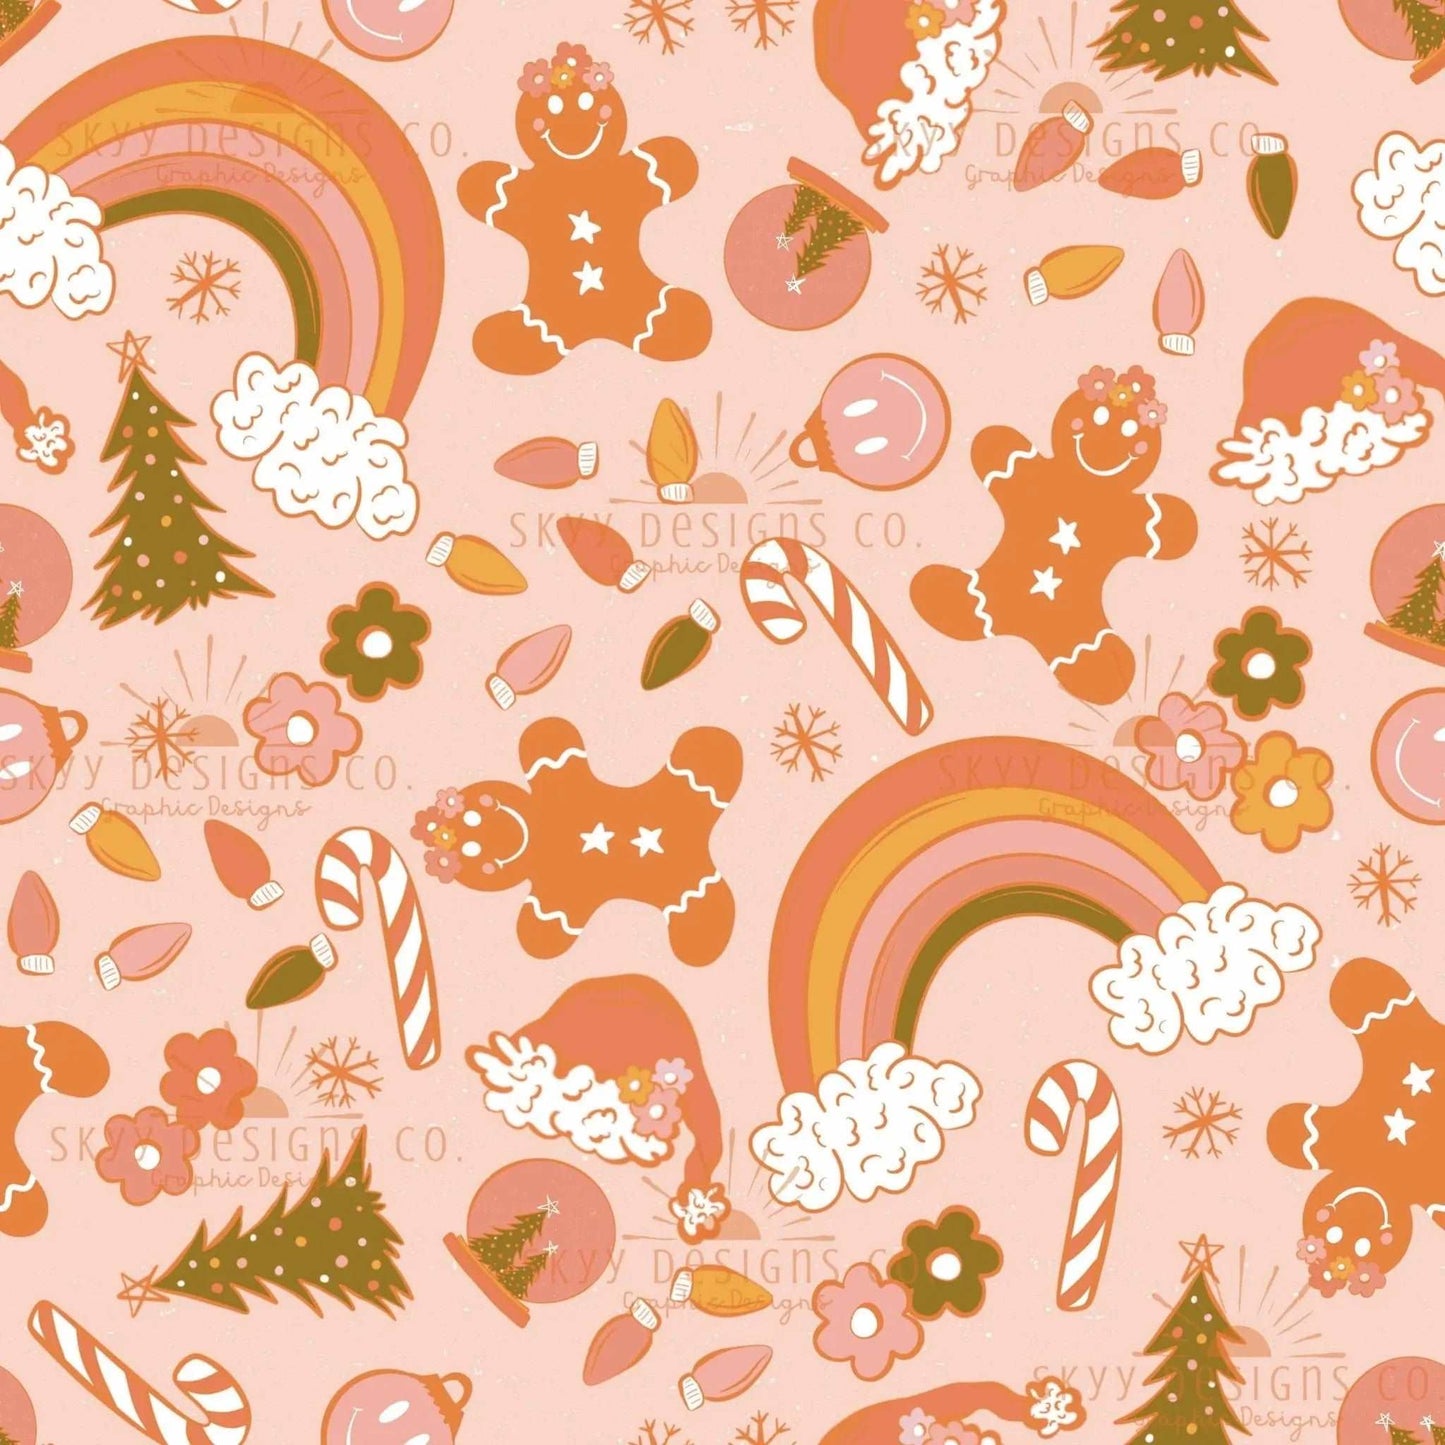 Retro Christmas digital seamless pattern for fabrics and wallpapers, groovy wi tee seamless pattern, digital paper retro Christmas pattern - SkyyDesignsCo